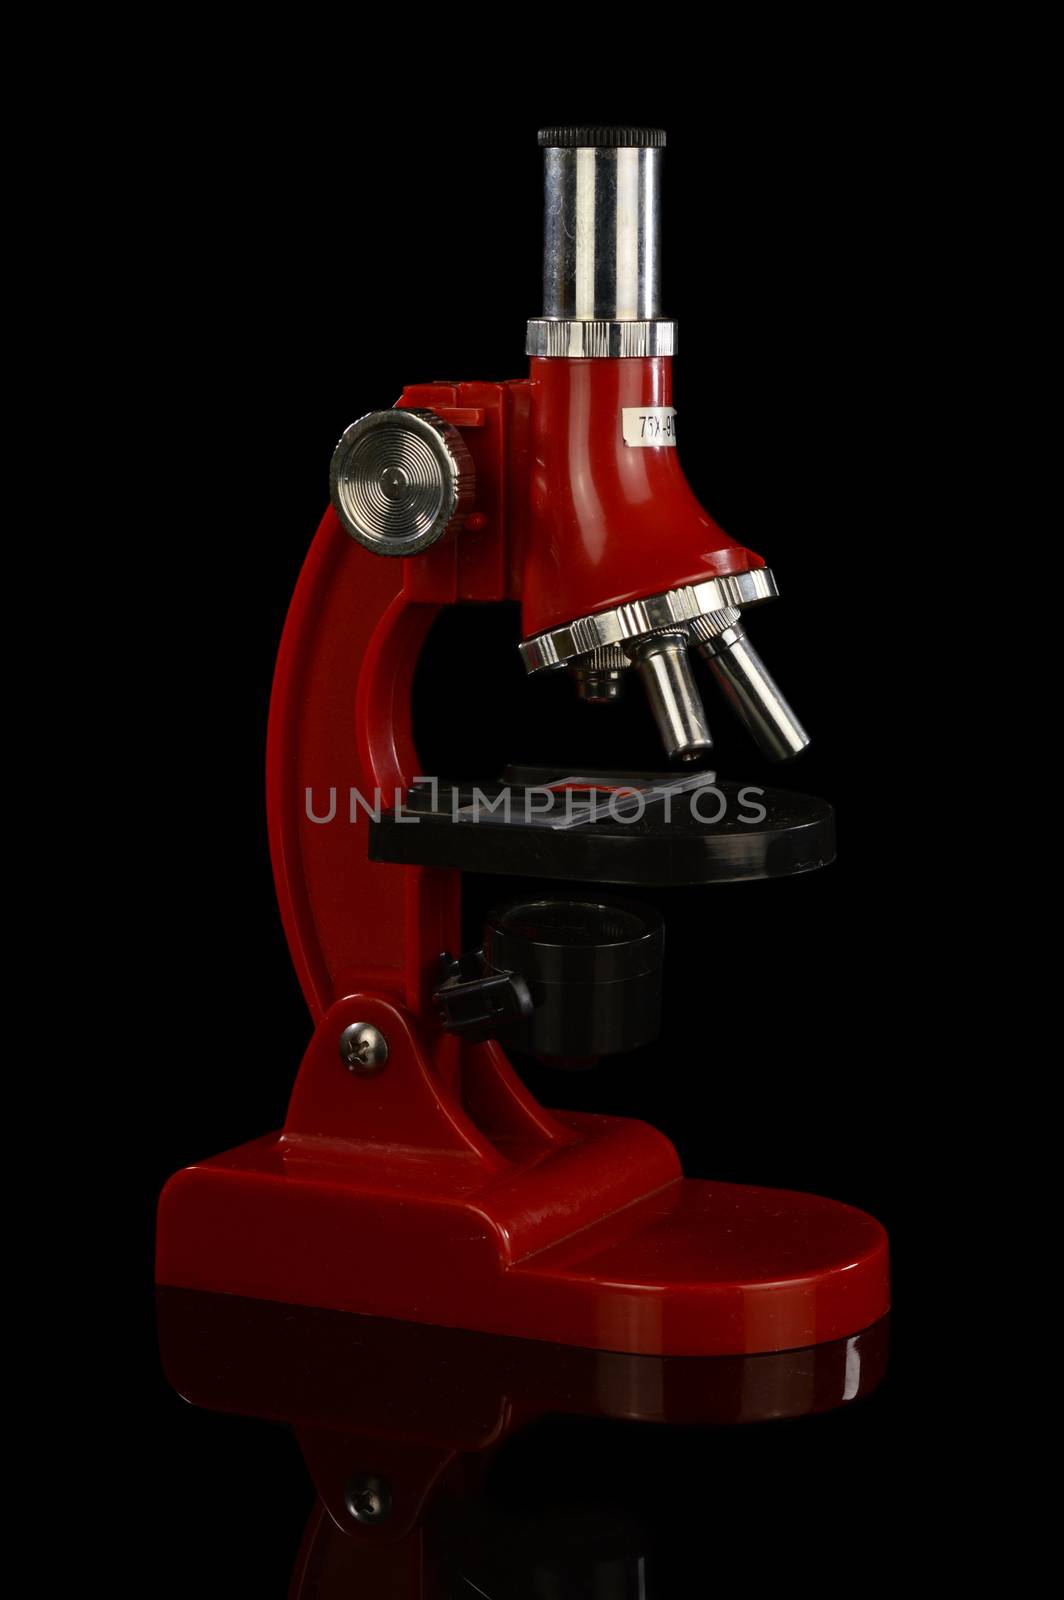 An isolated over a black reflective surface image of a red scientific microscope.